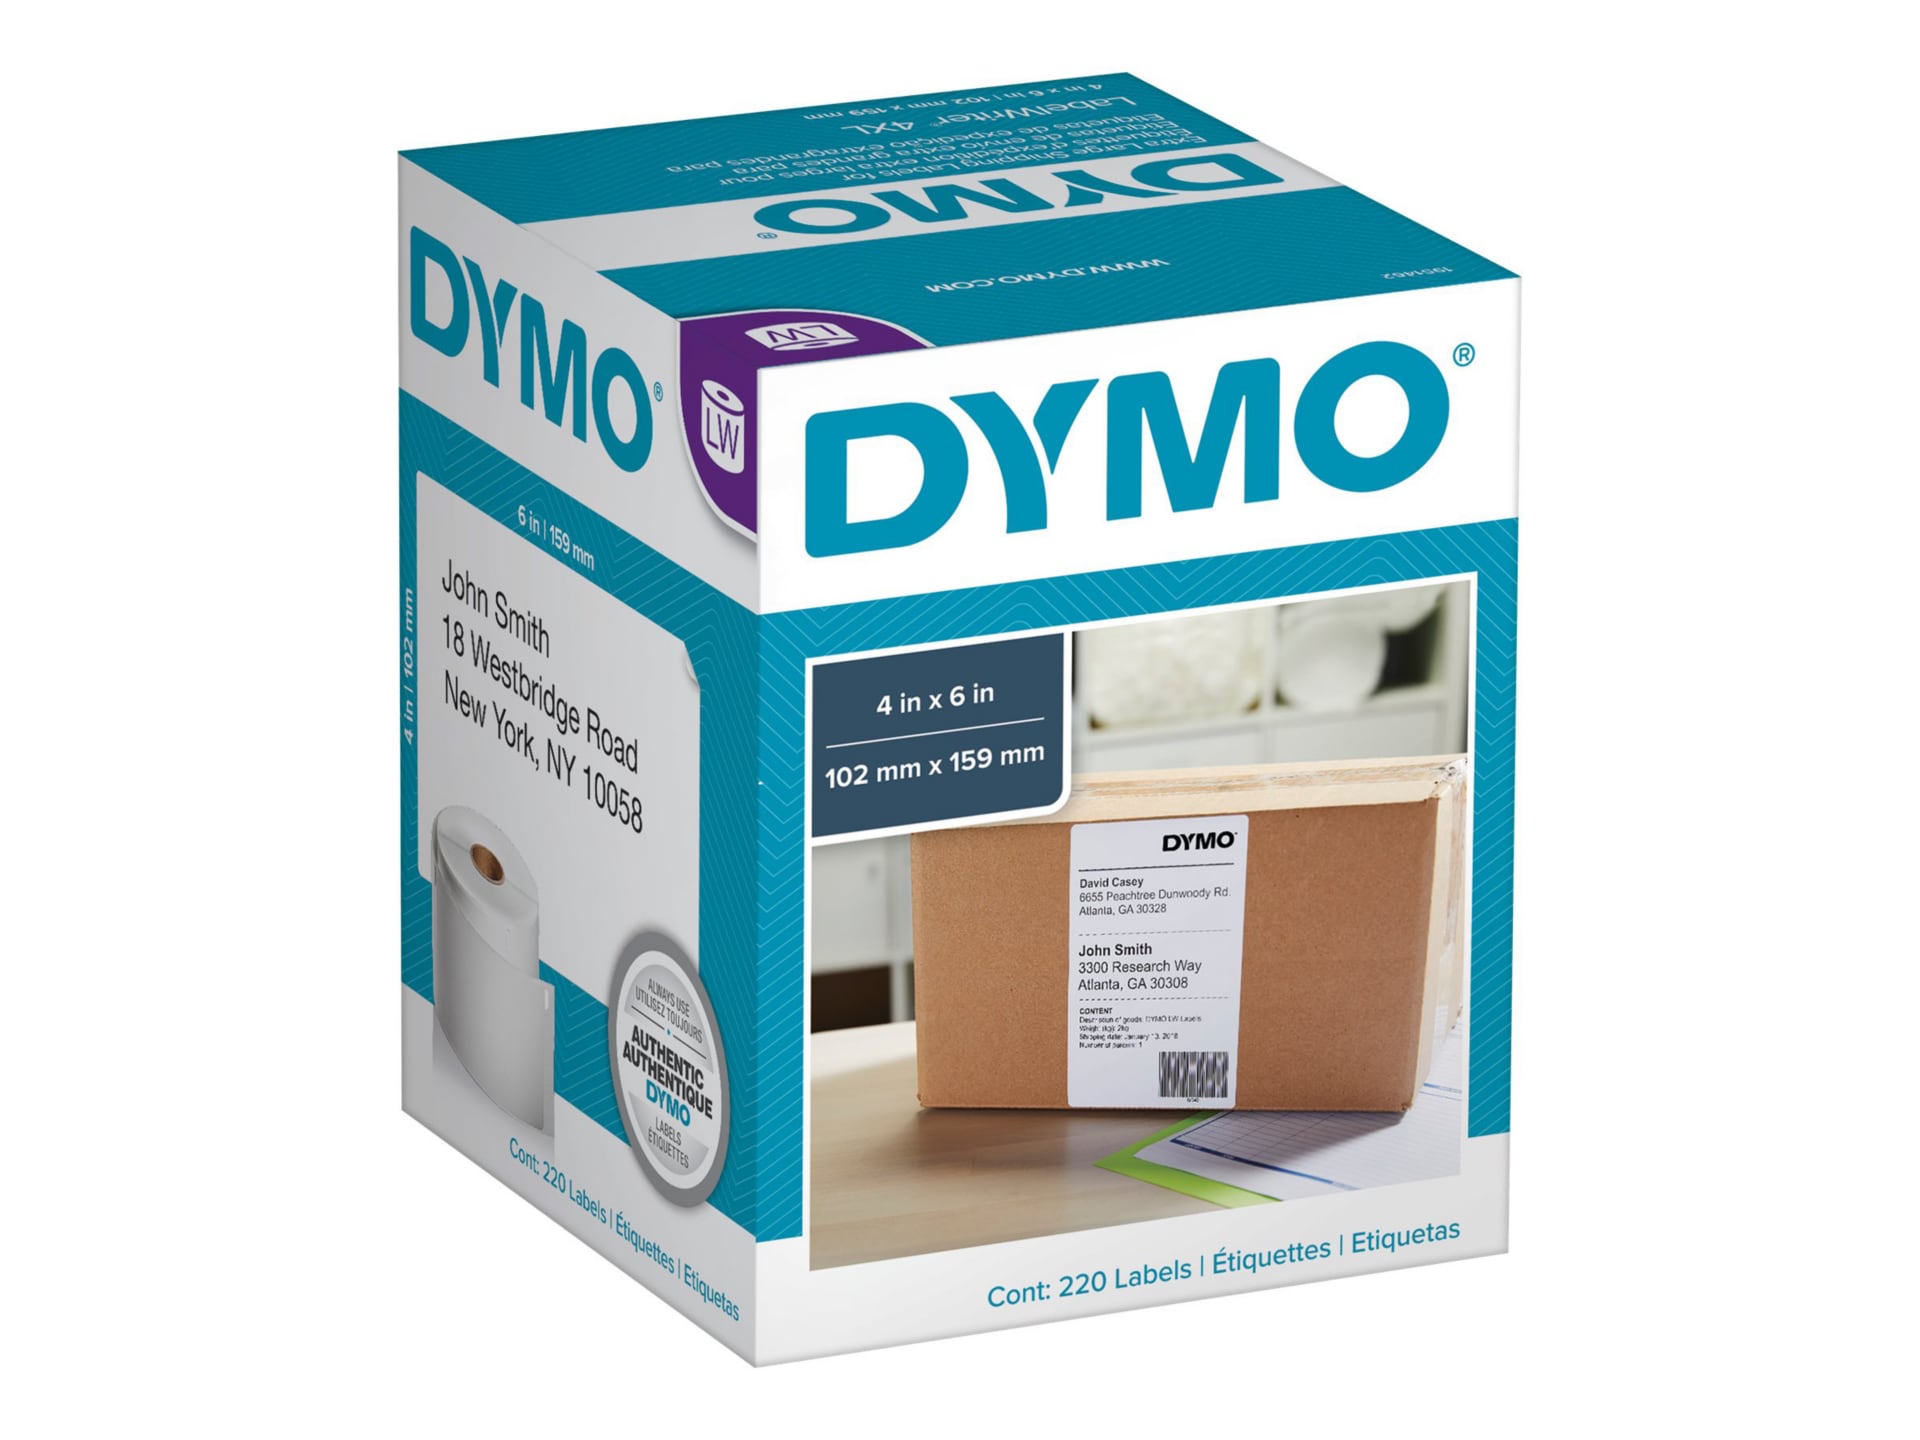 Dymo LabelWriter Extra Large - shipping labels - 220 label(s) - 4 in x 6 in